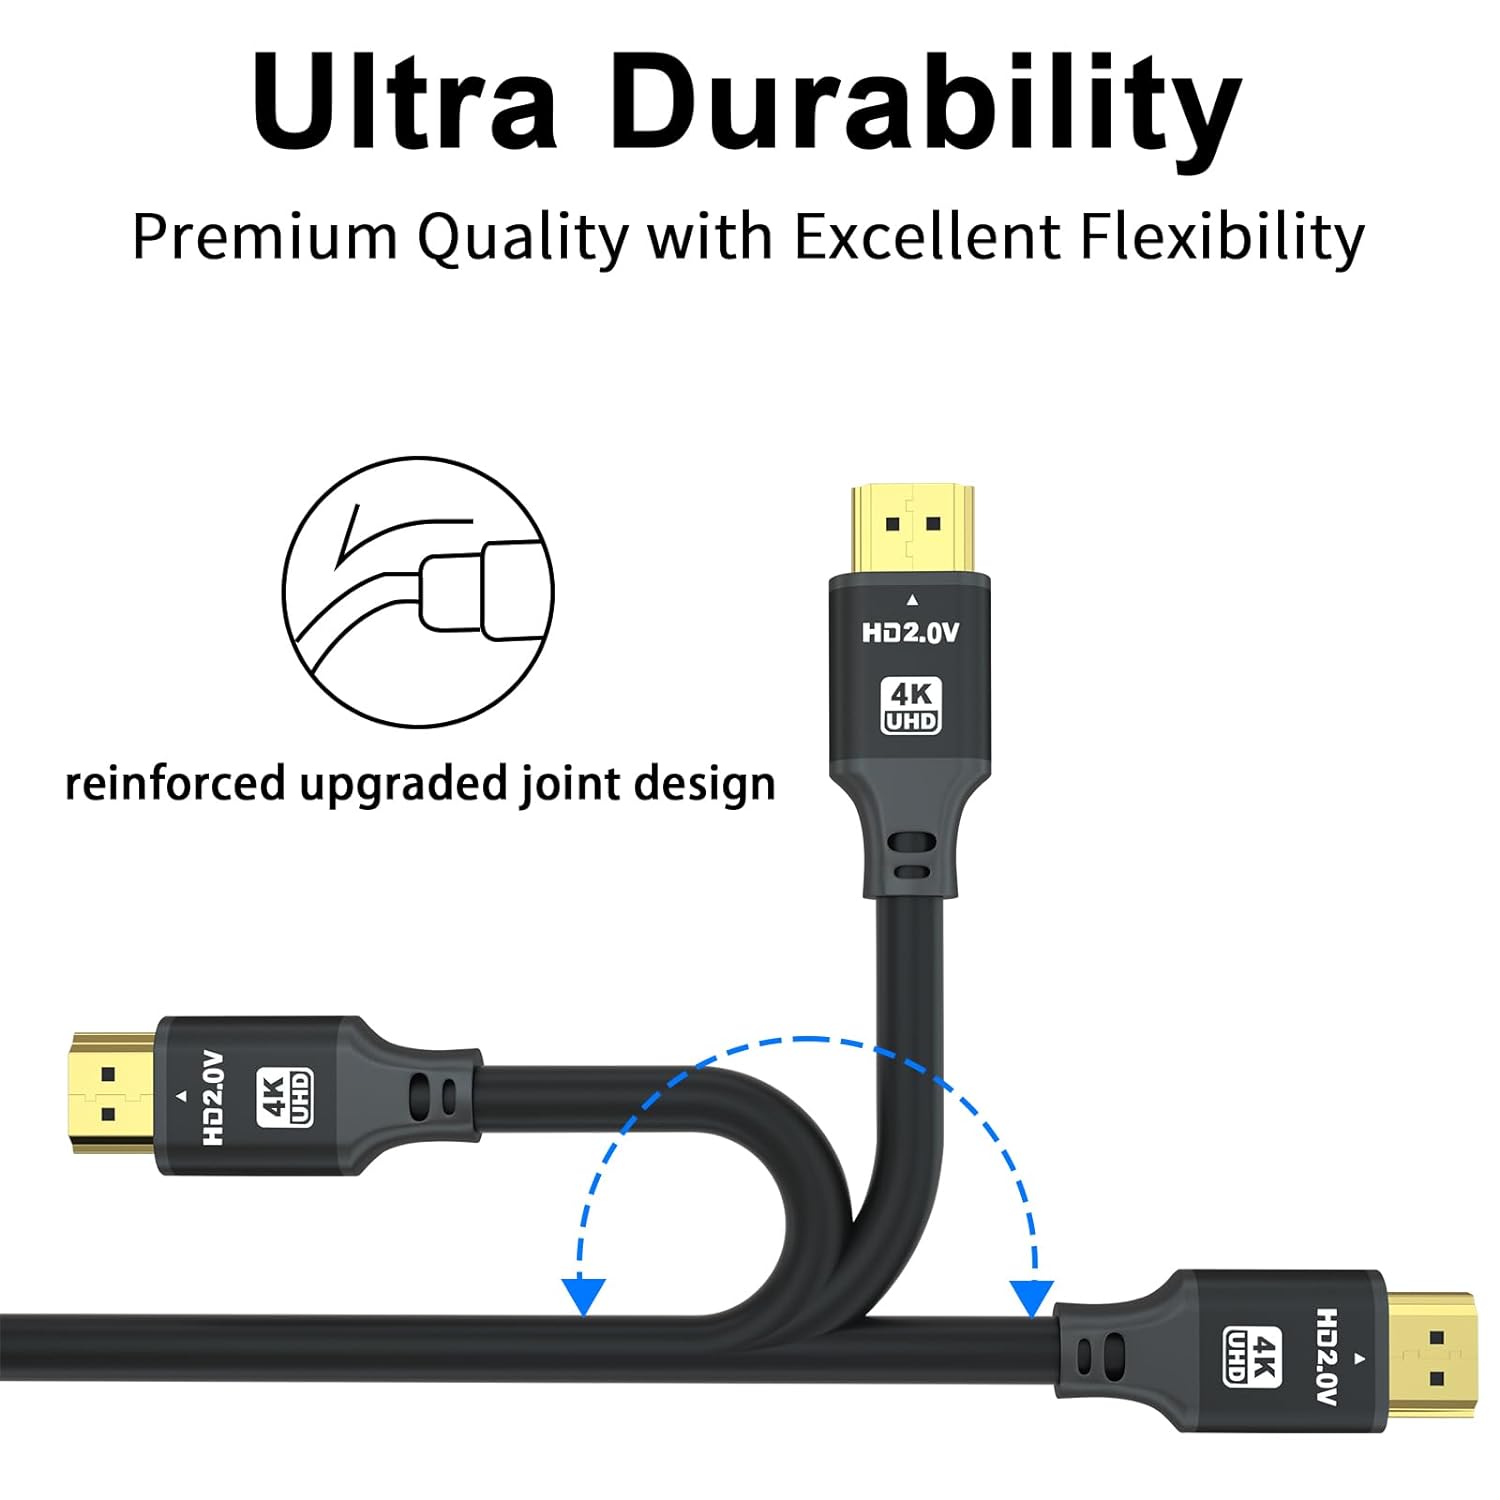 jojobnj HDMI Cable 25ft, 48Gbps 8K@60Hz 4K@120Hz, HDCP 2.2 & 2.3, DTS:X, HDR 10 Compatible with Roku TV/eARC/3D/PS5/HDTV/Laptop/Blu-ray High Speed HDMI Cable(Black)